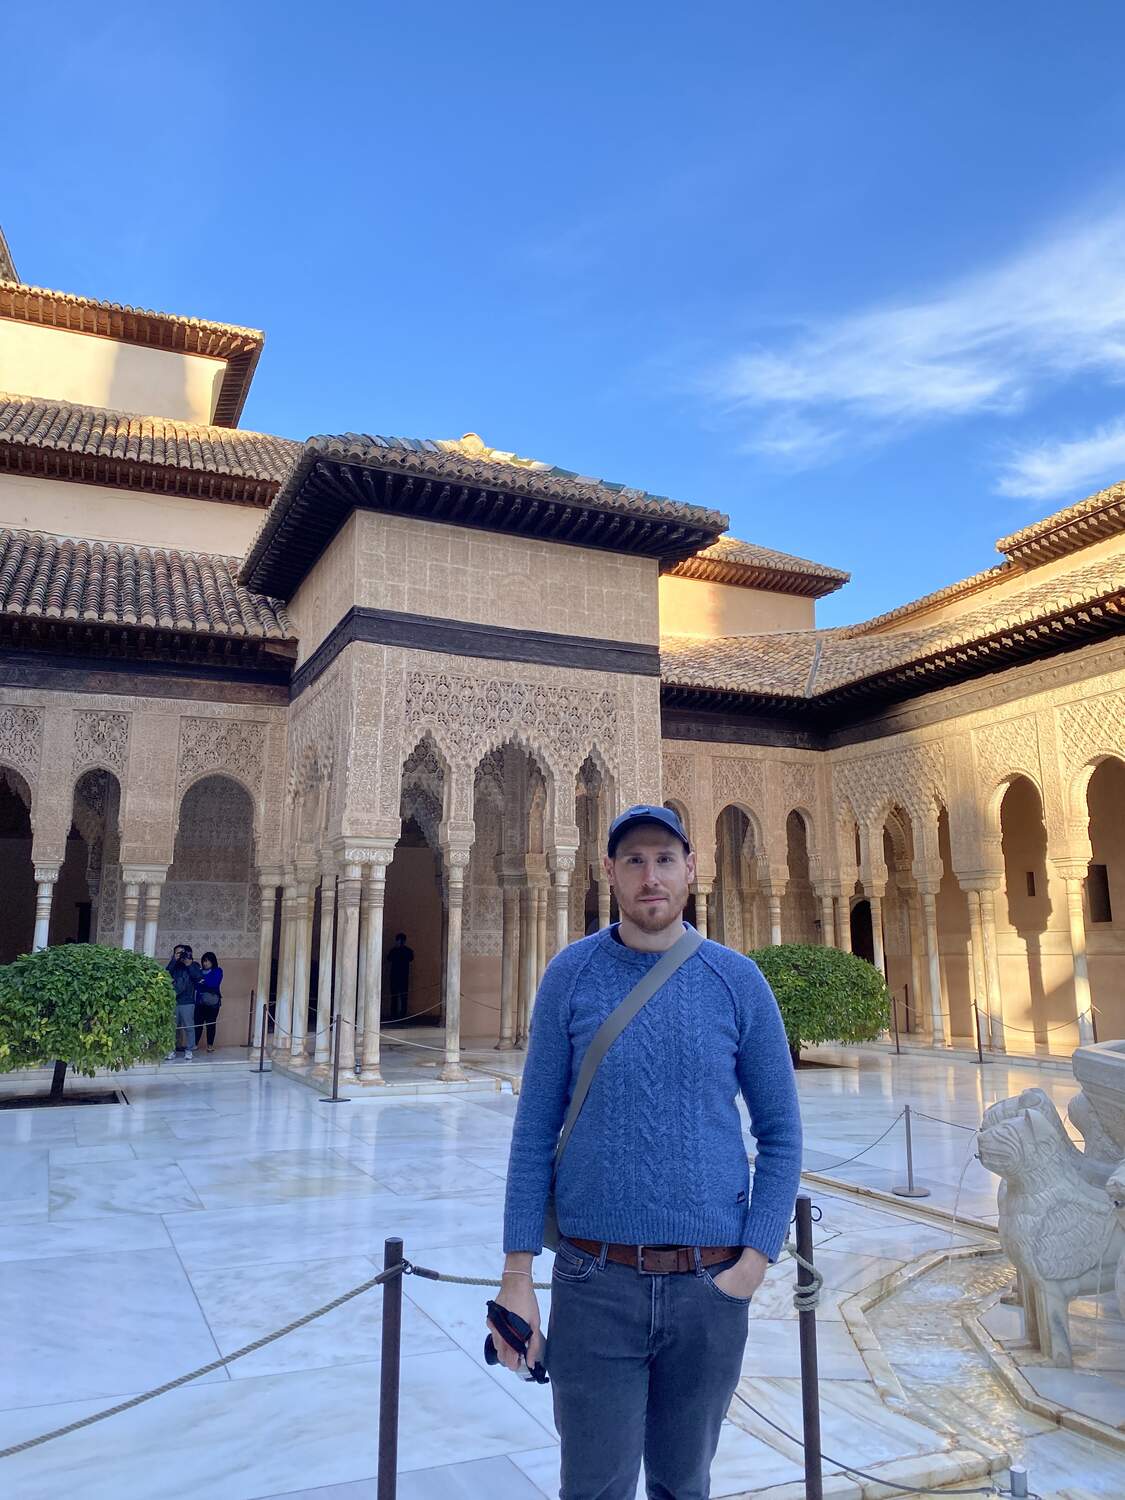 Dress code for the Alhambra in winter and fall